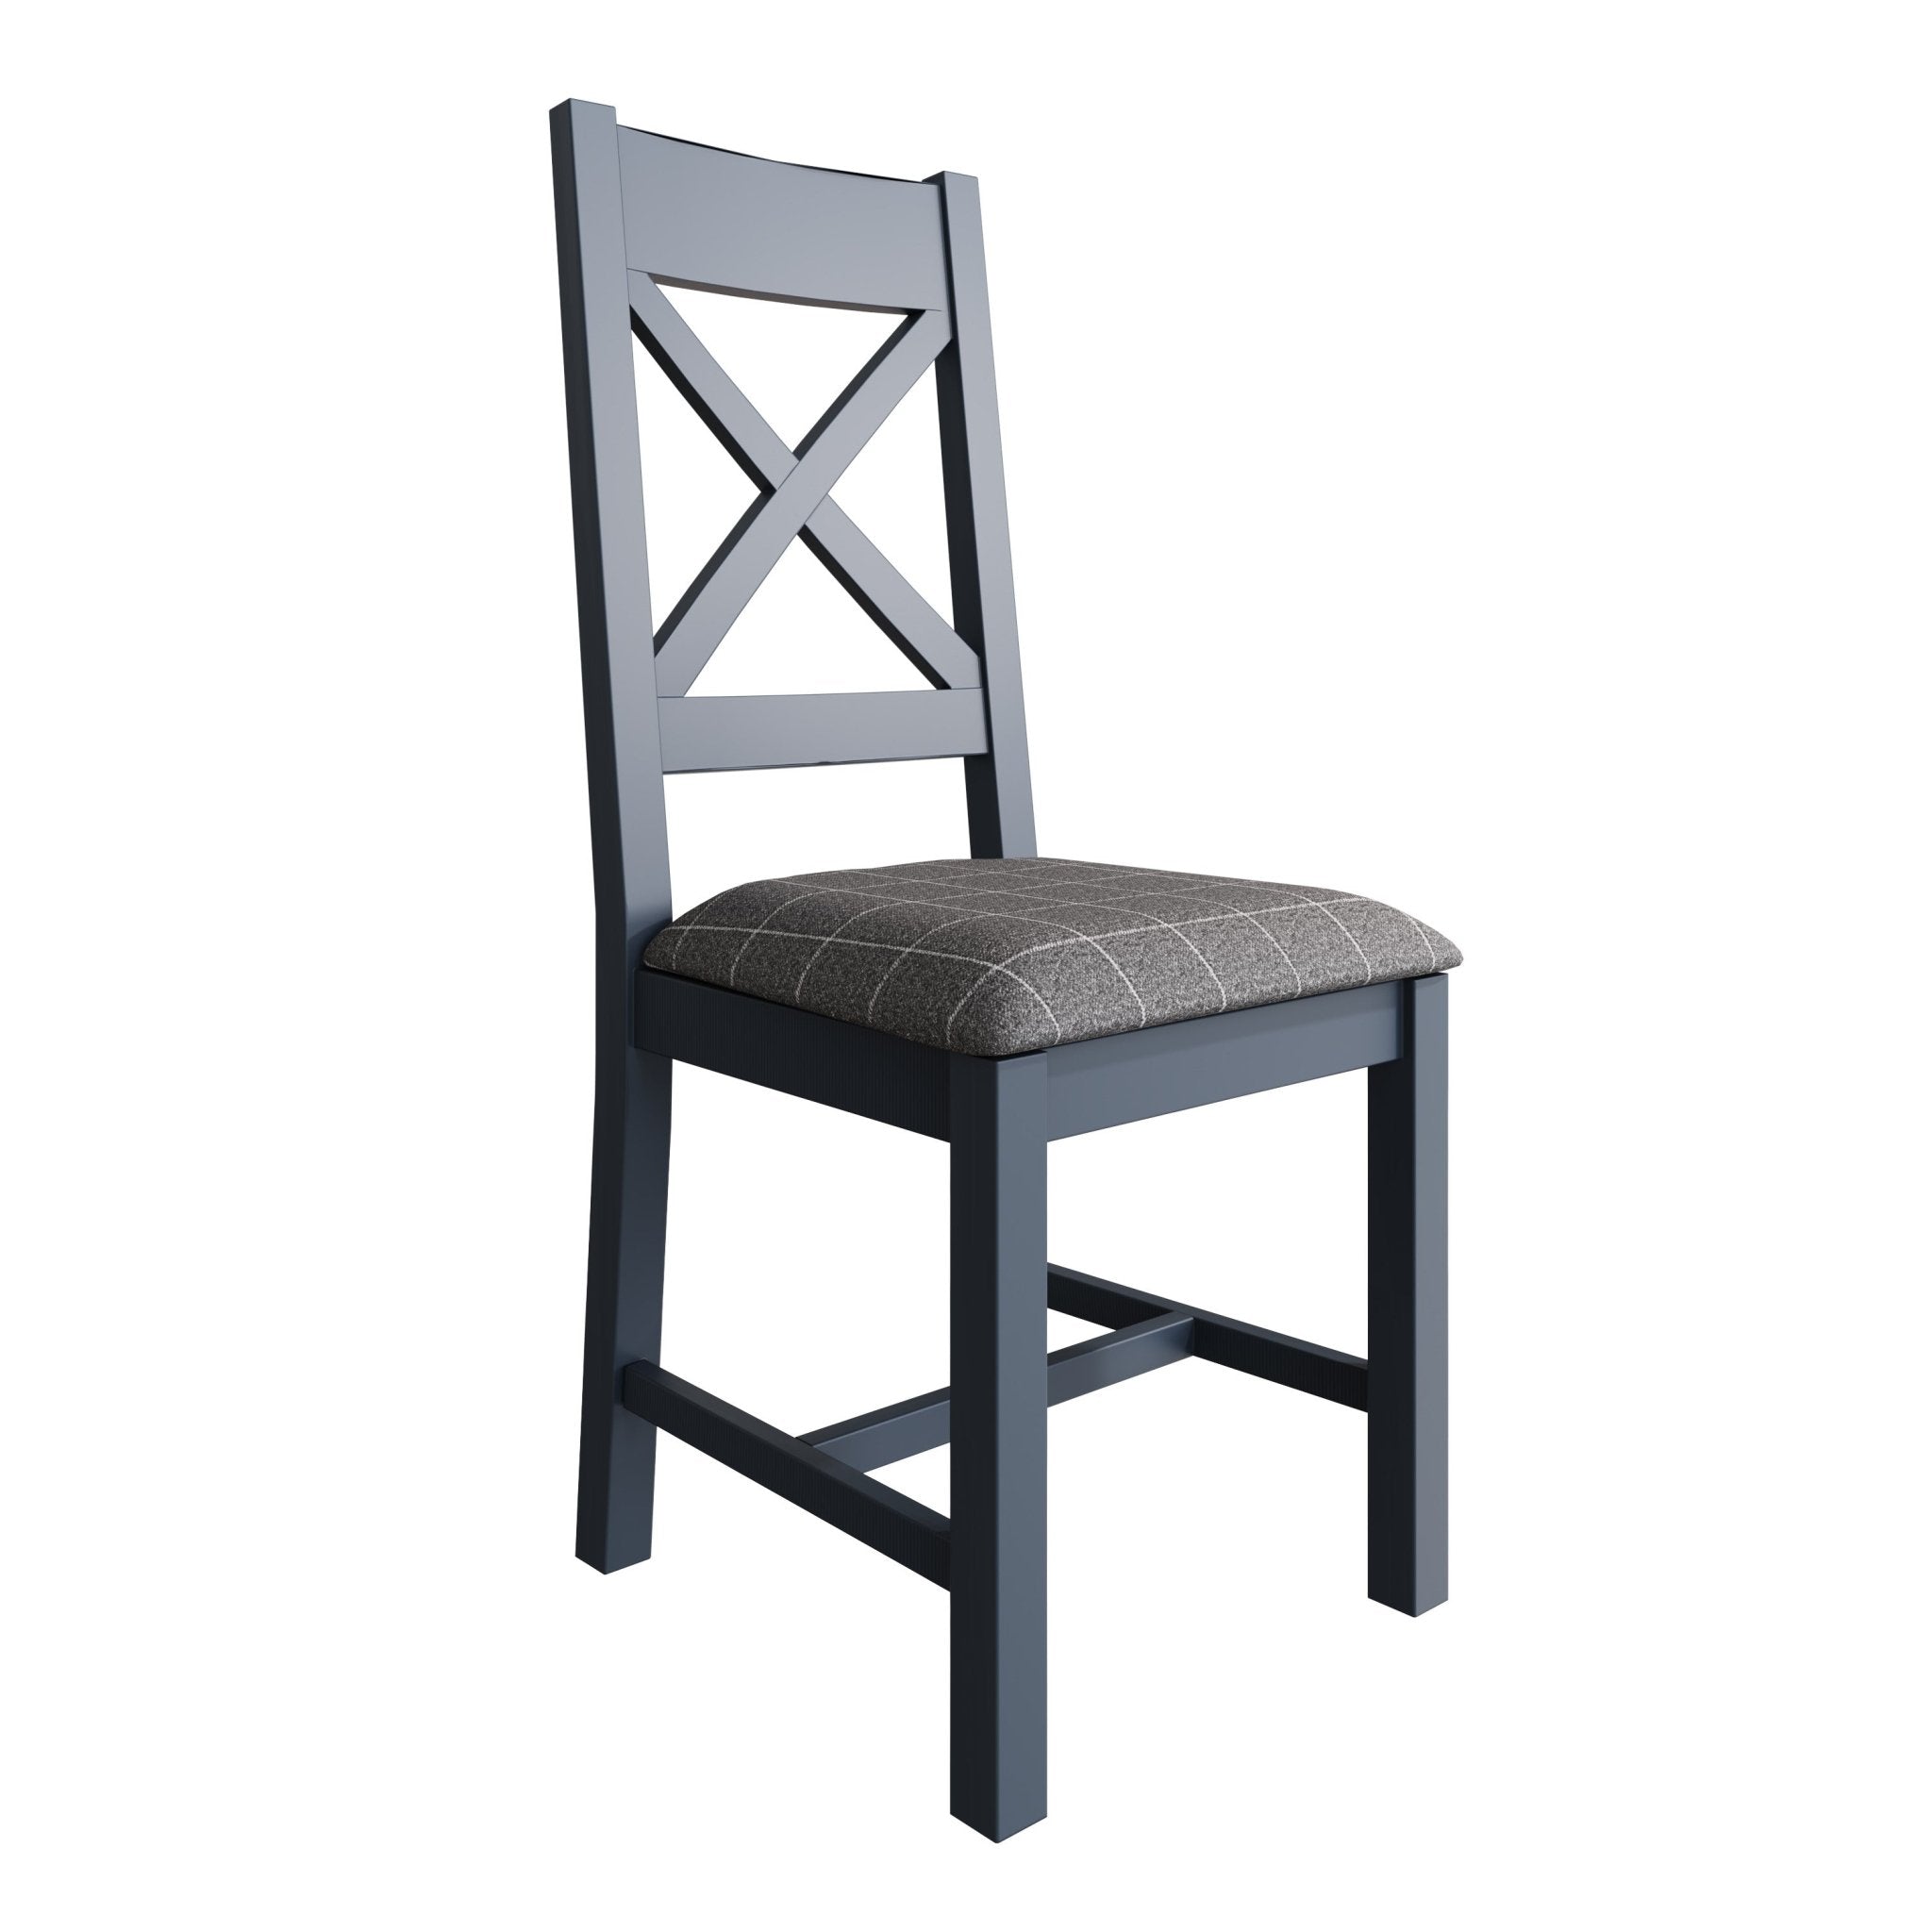 Rogate Blue Painted Cross Back Fabric Dining Chair - Grey Check - Duck Barn Interiors